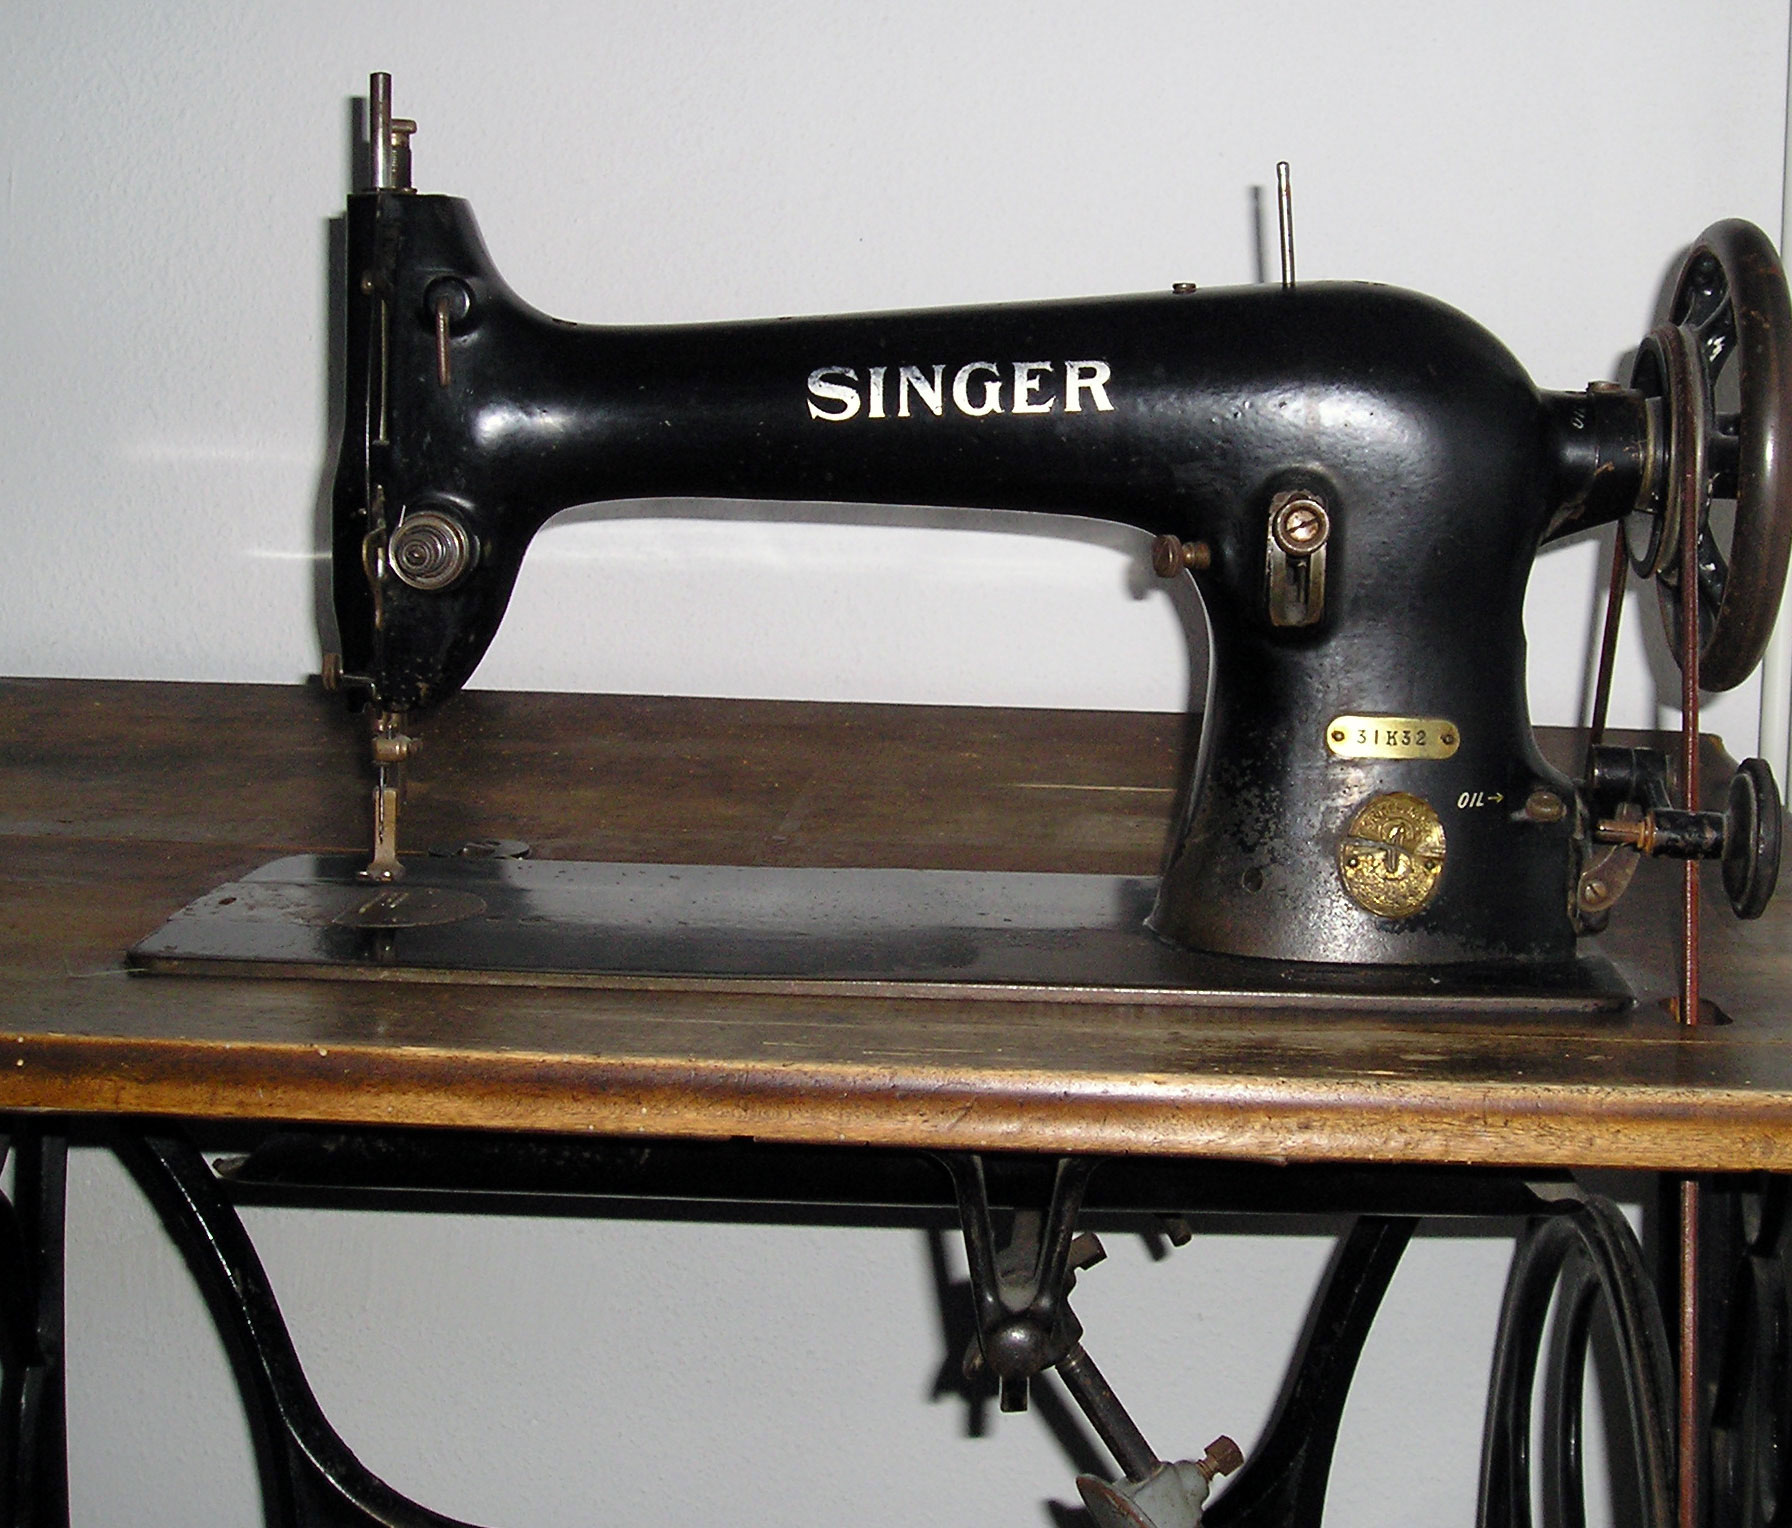 Isaac Singer is granted a patent for his sewing machine